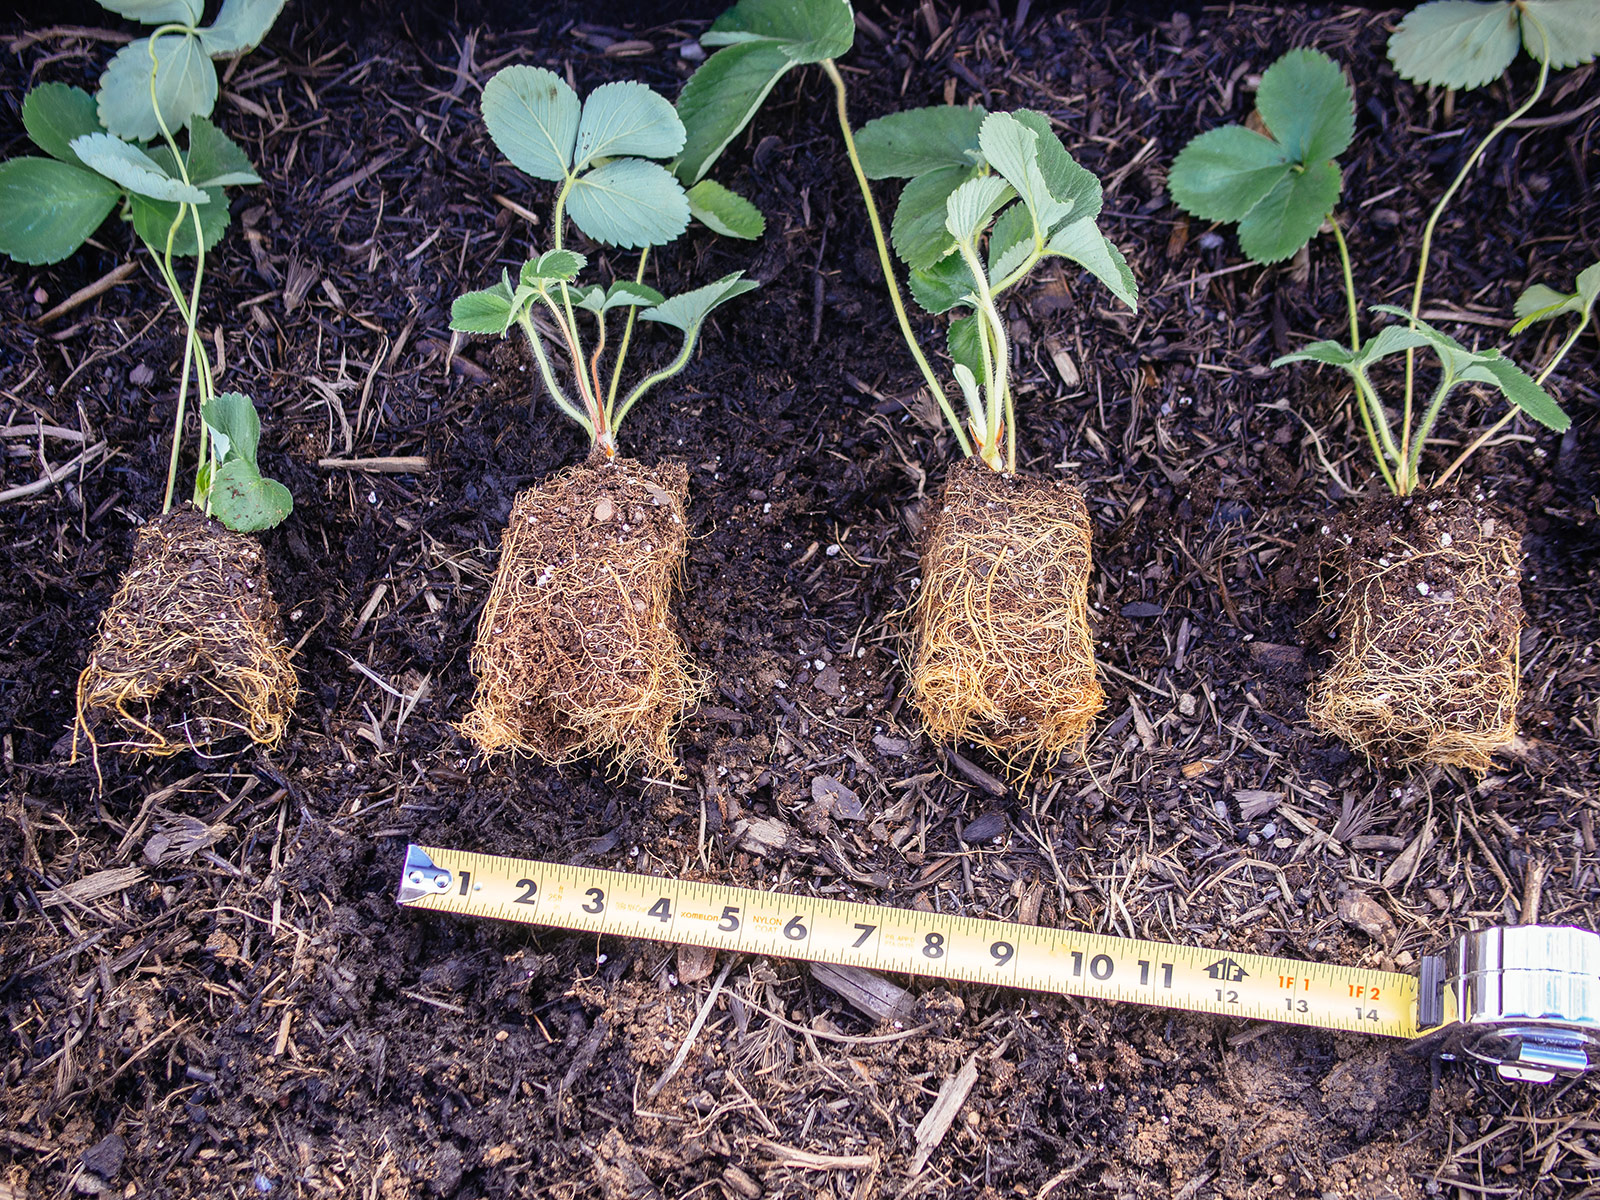 Four strawberry plants spread out on the soil with a yellow tape measure underneath them